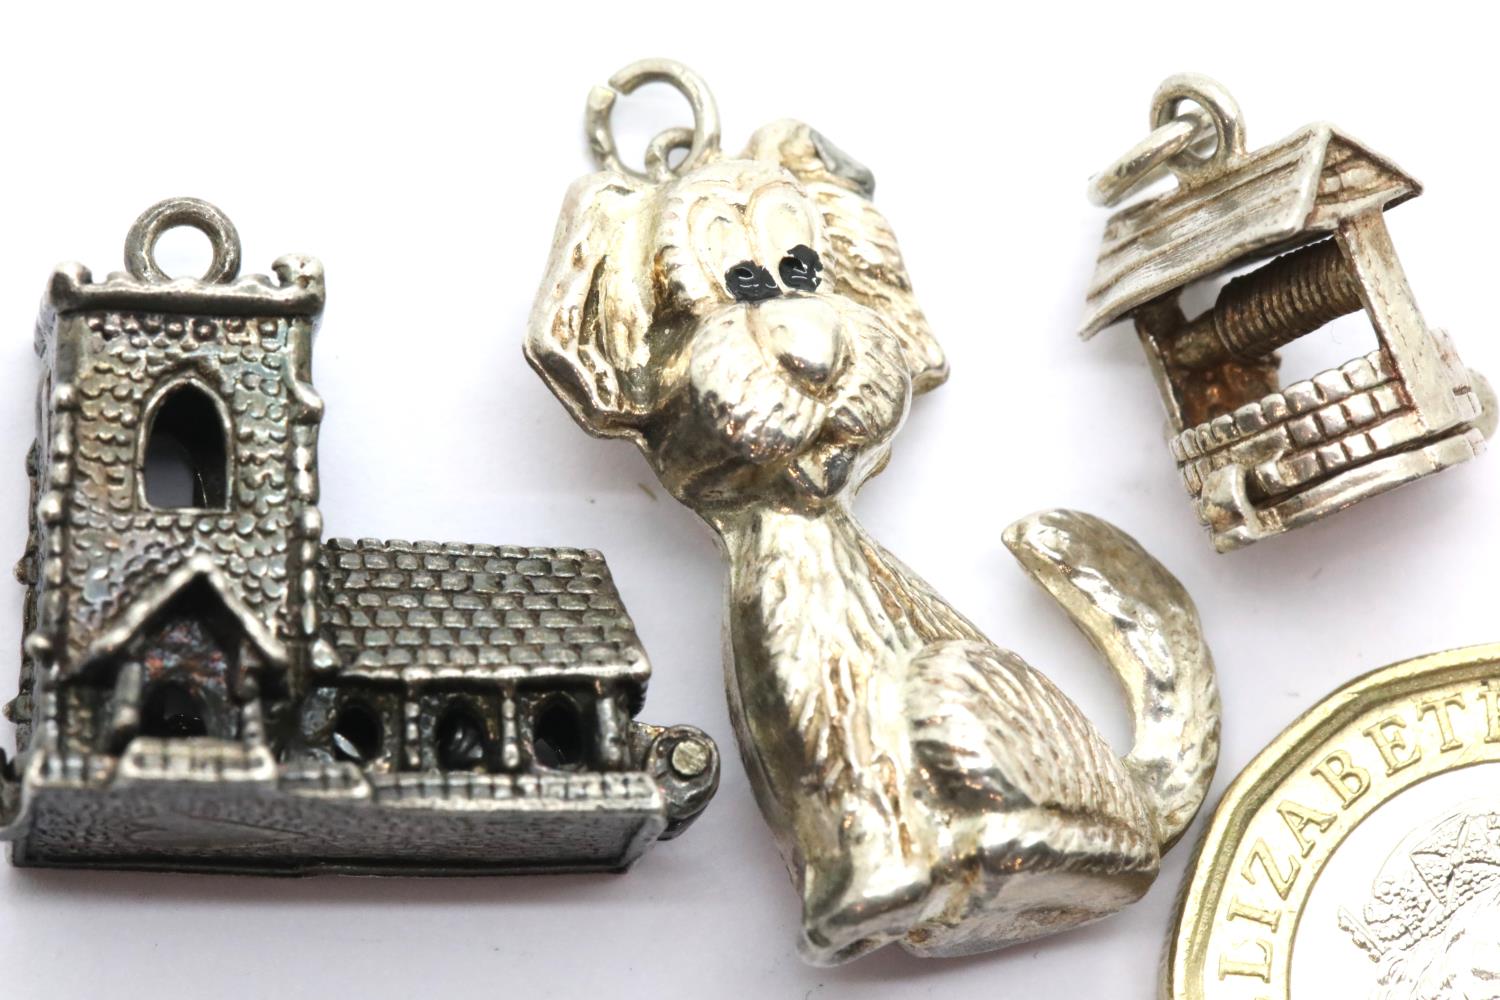 Three 70s vintage silver charms, Church, well and dog. P&P Group 1 (£14+VAT for the first lot and £